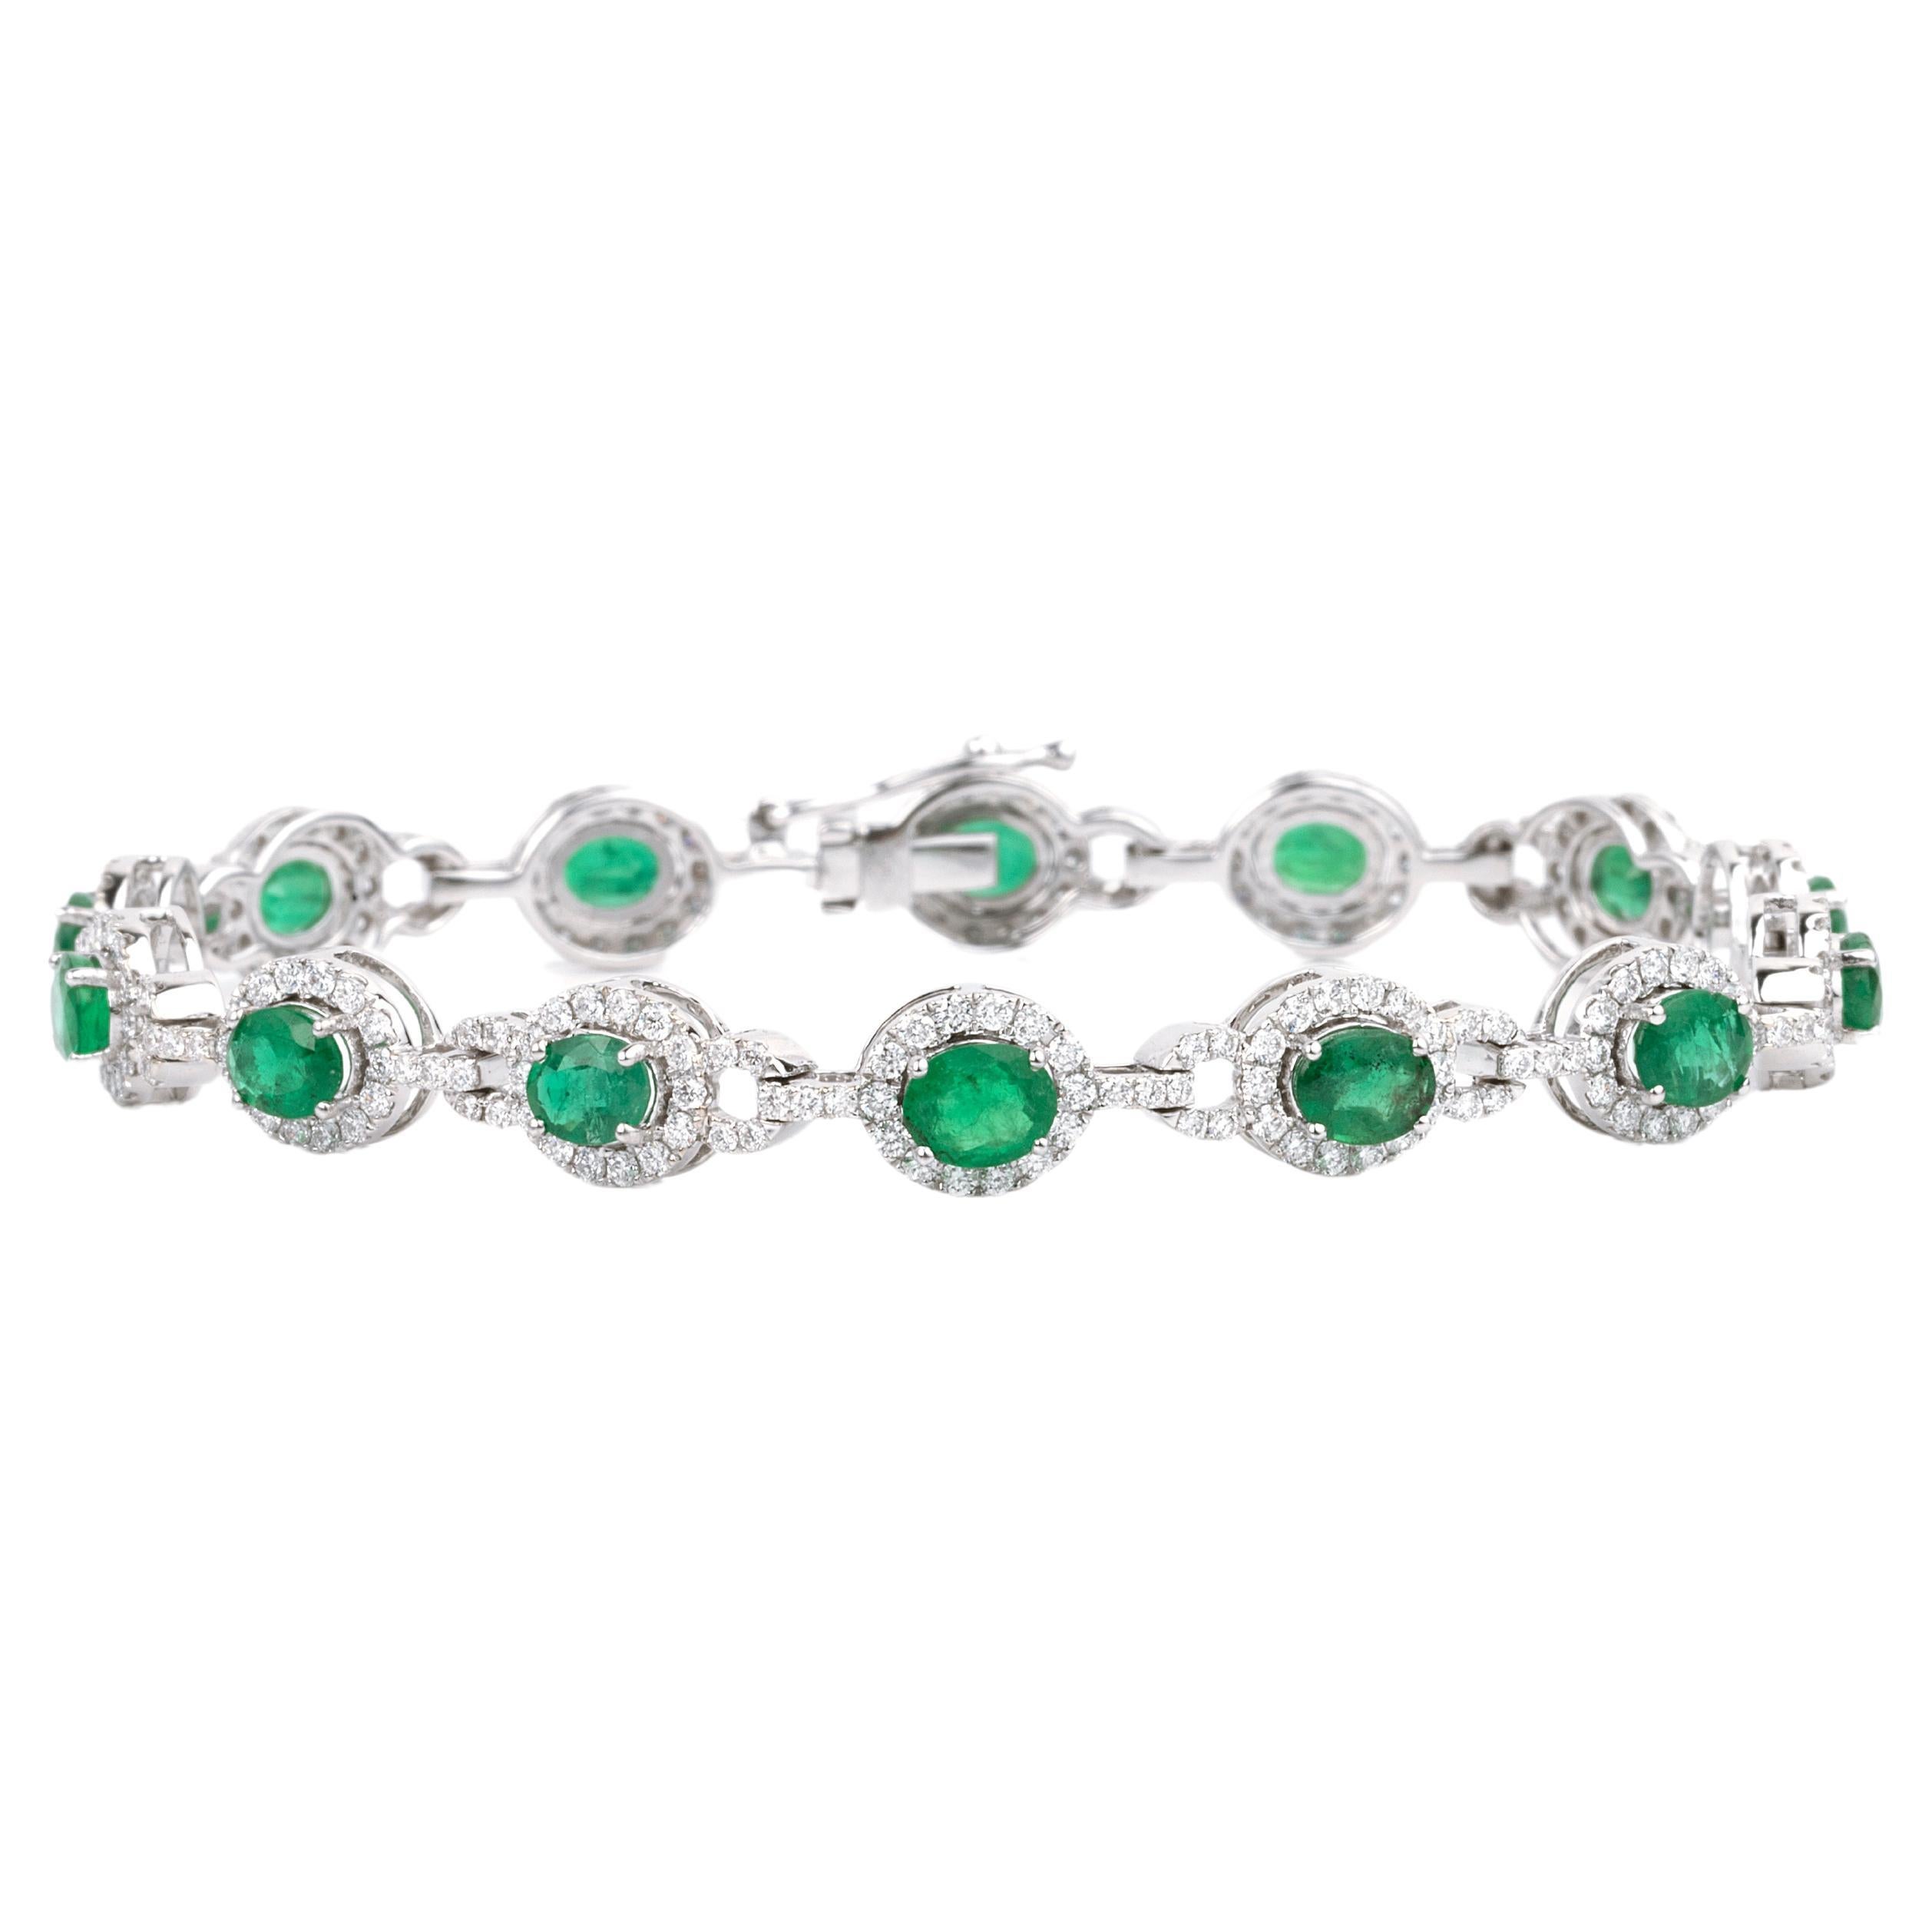 Exceptional 5 Ctw Oval Cut Natural Emerald Bracelet with diamond 18k White Gold